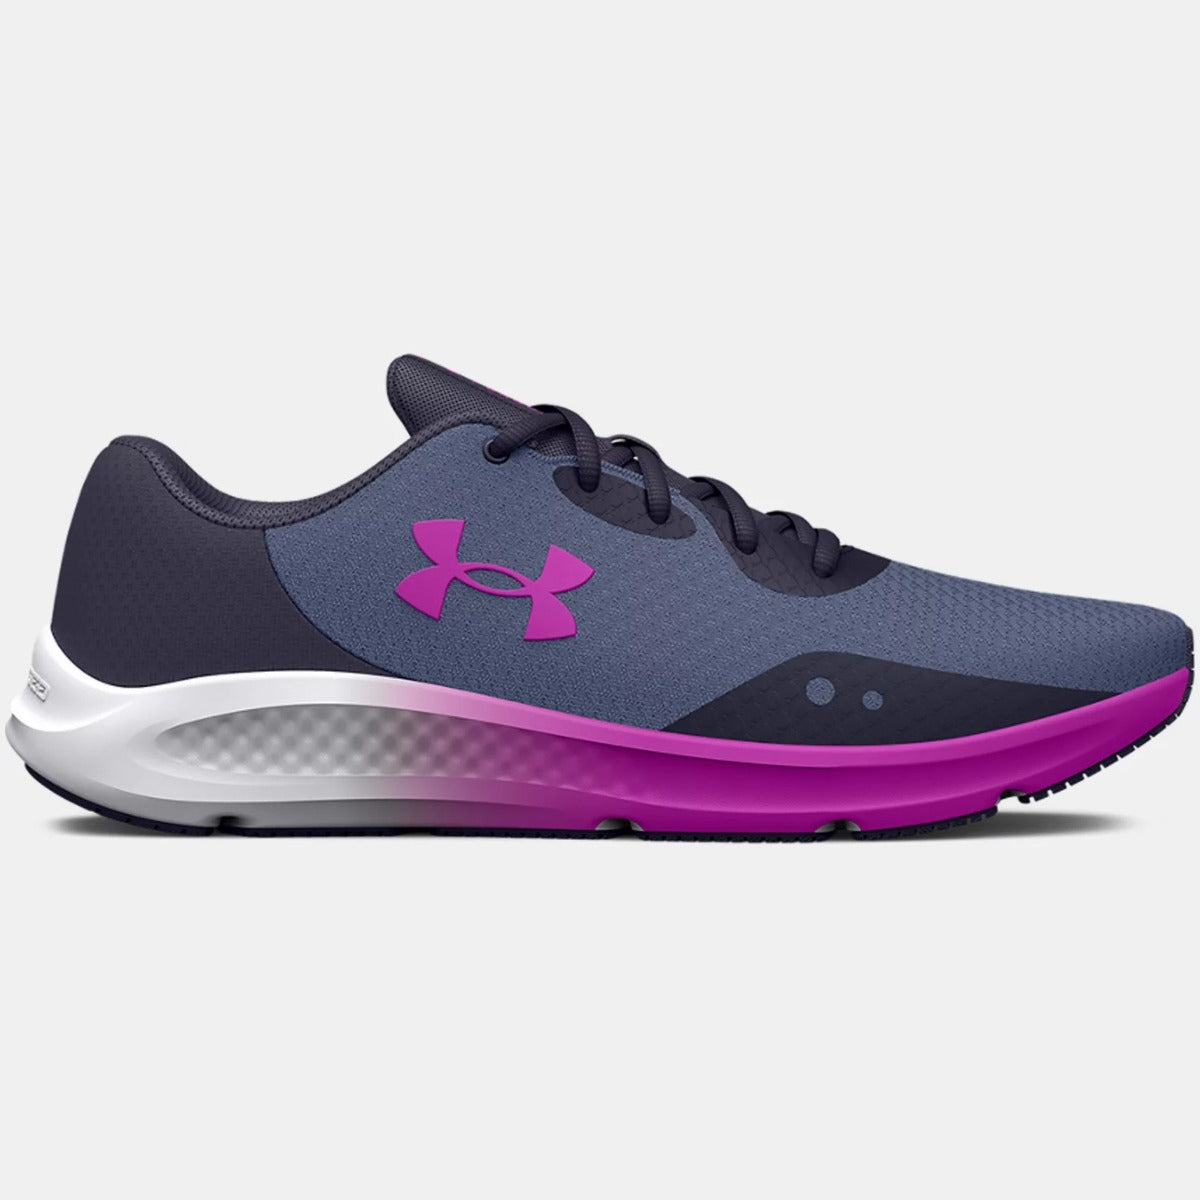 Under Armour Charged Pursuit 3 Running Shoes Women's (Grey Purple 500)